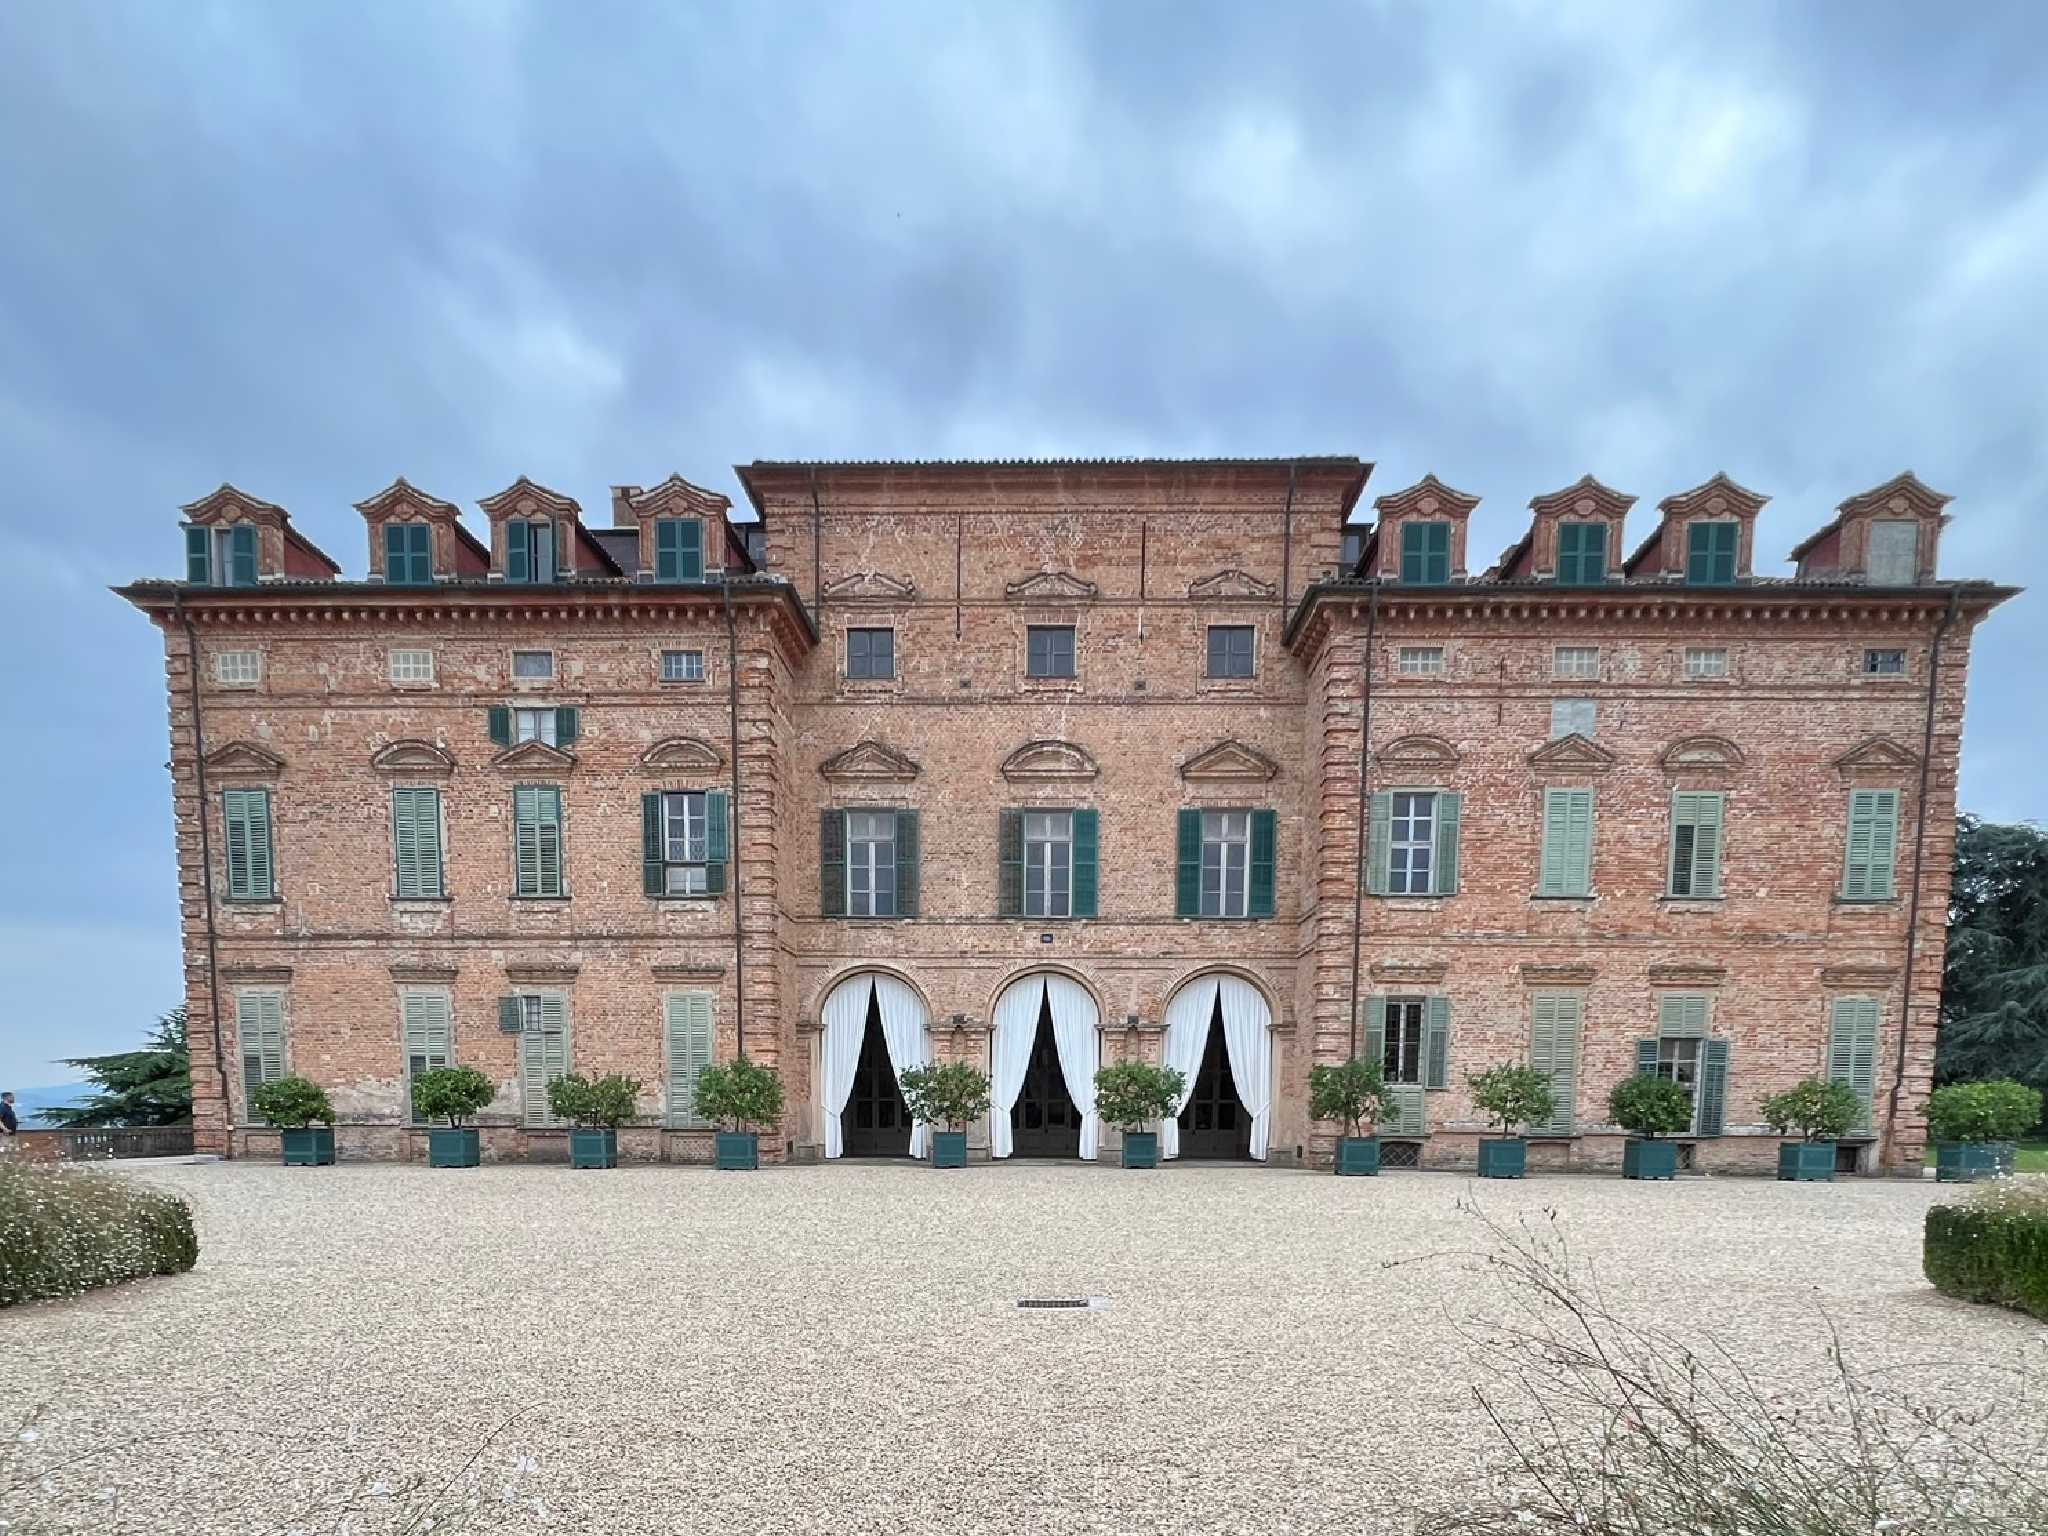 Stay in a baroque castle dating back to 1696